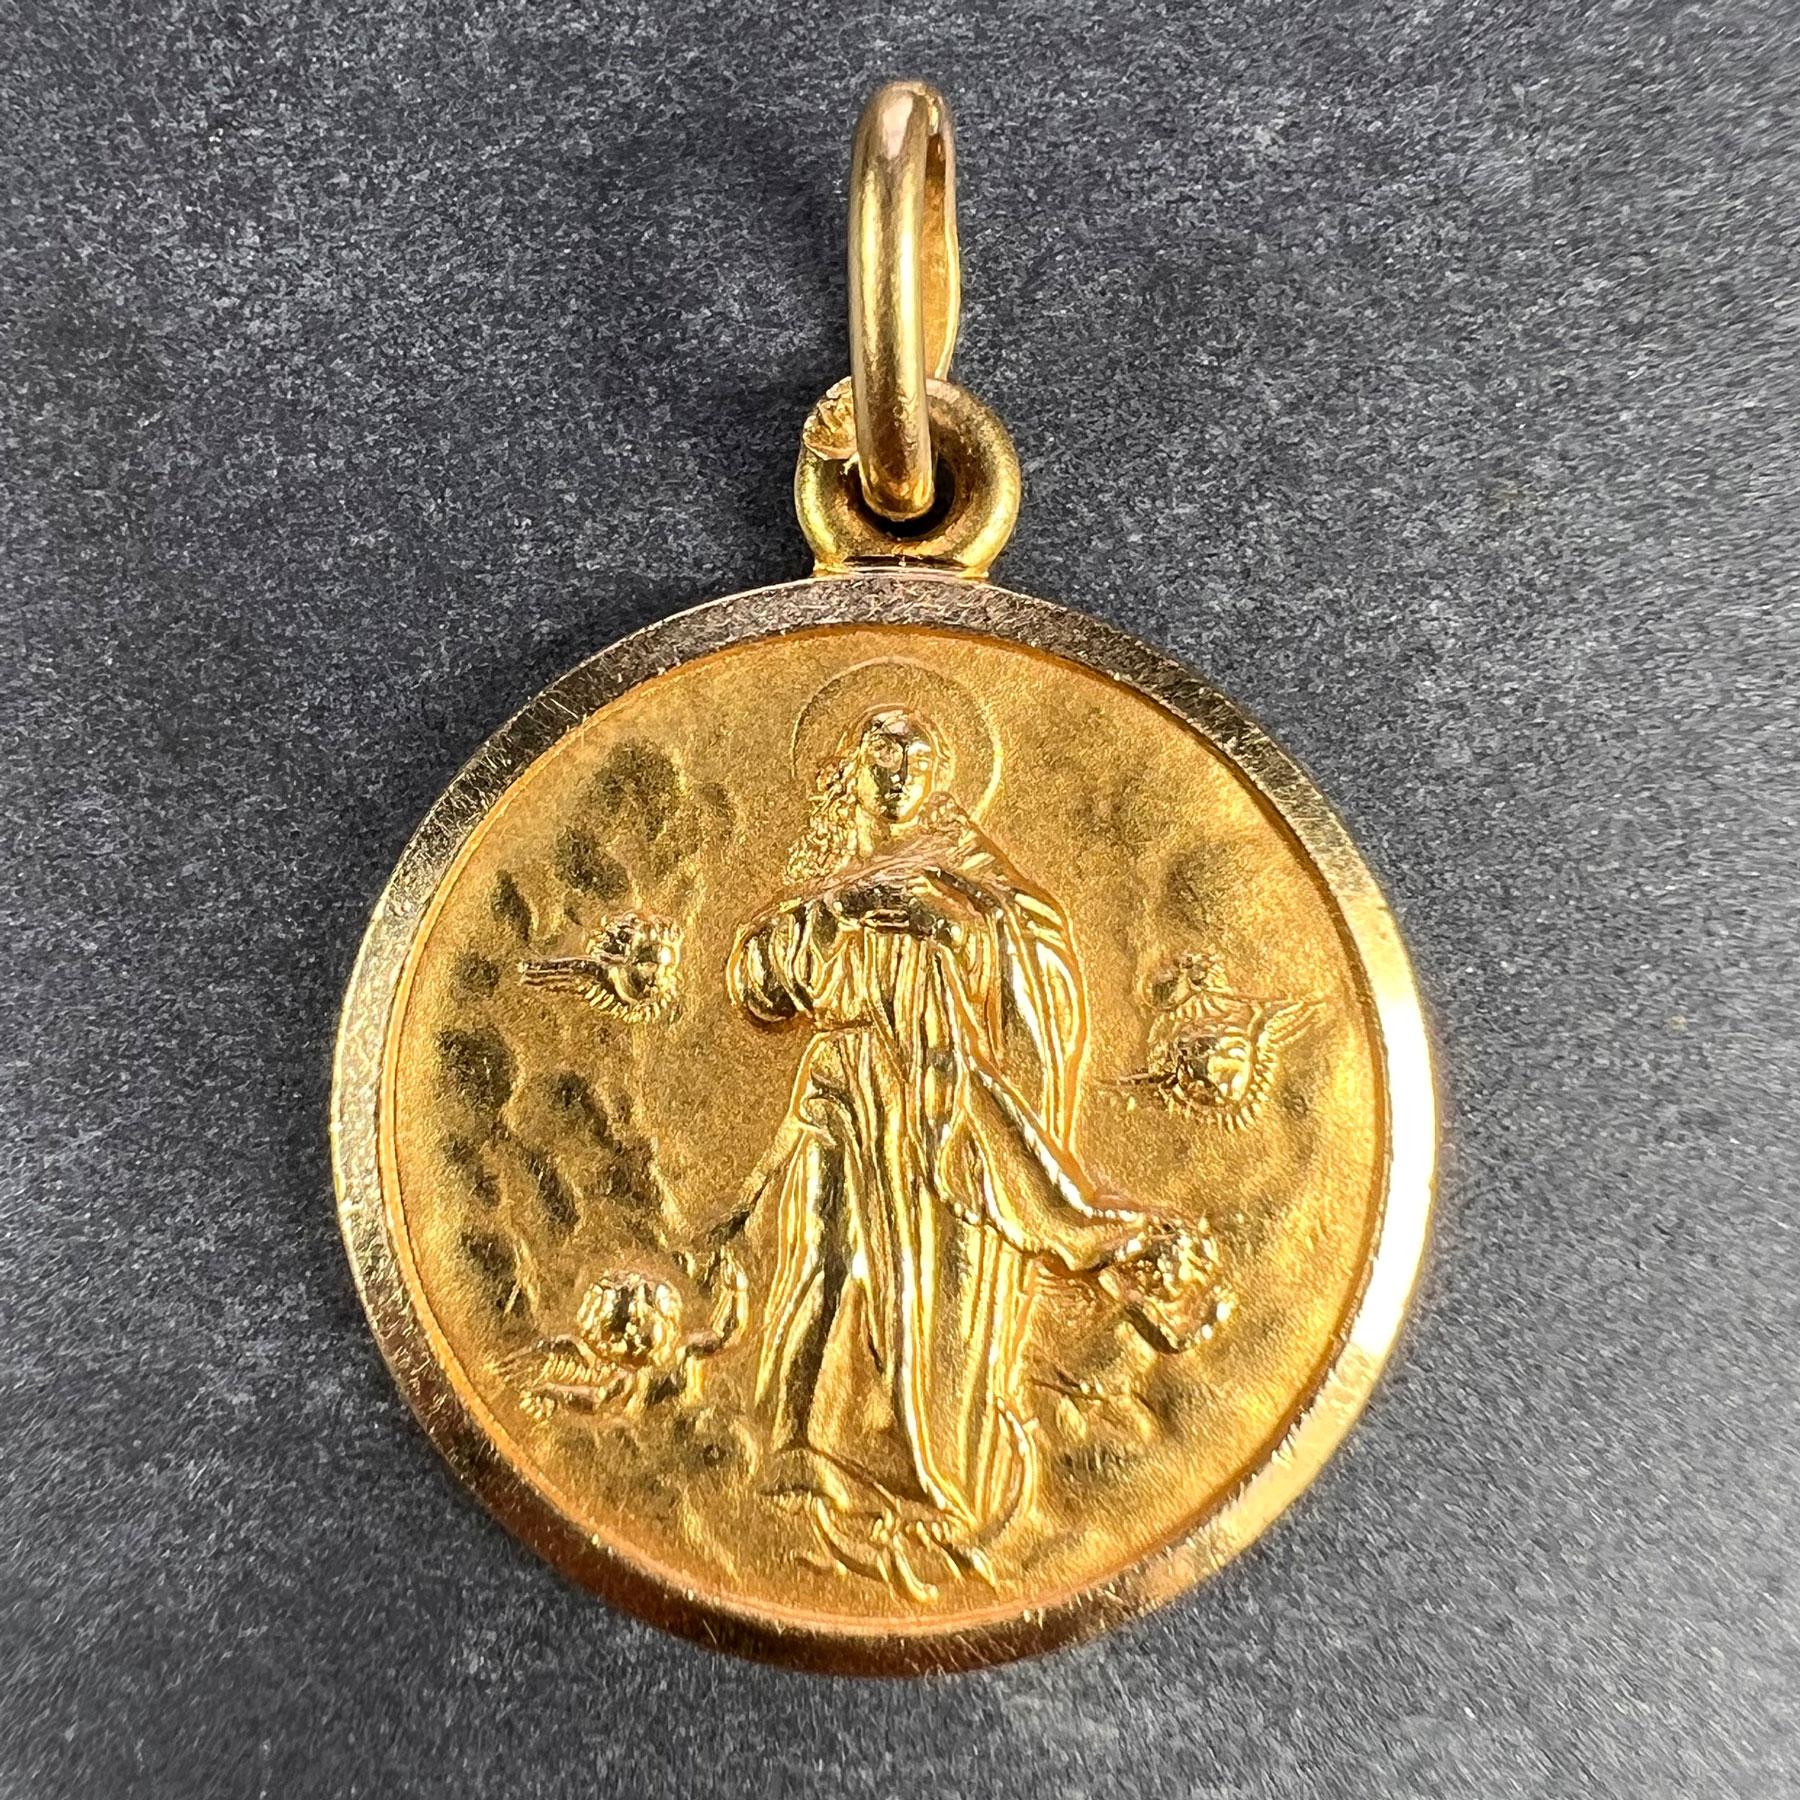 An Italian 18 karat (18K) yellow gold charm pendant designed as a medal depicting the Virgin Mary in Heaven surrounded by putti. Stamped 750 for 18 karat gold and Italian manufacture and marked 1AR and UNO AR to the jump ring for Gori &